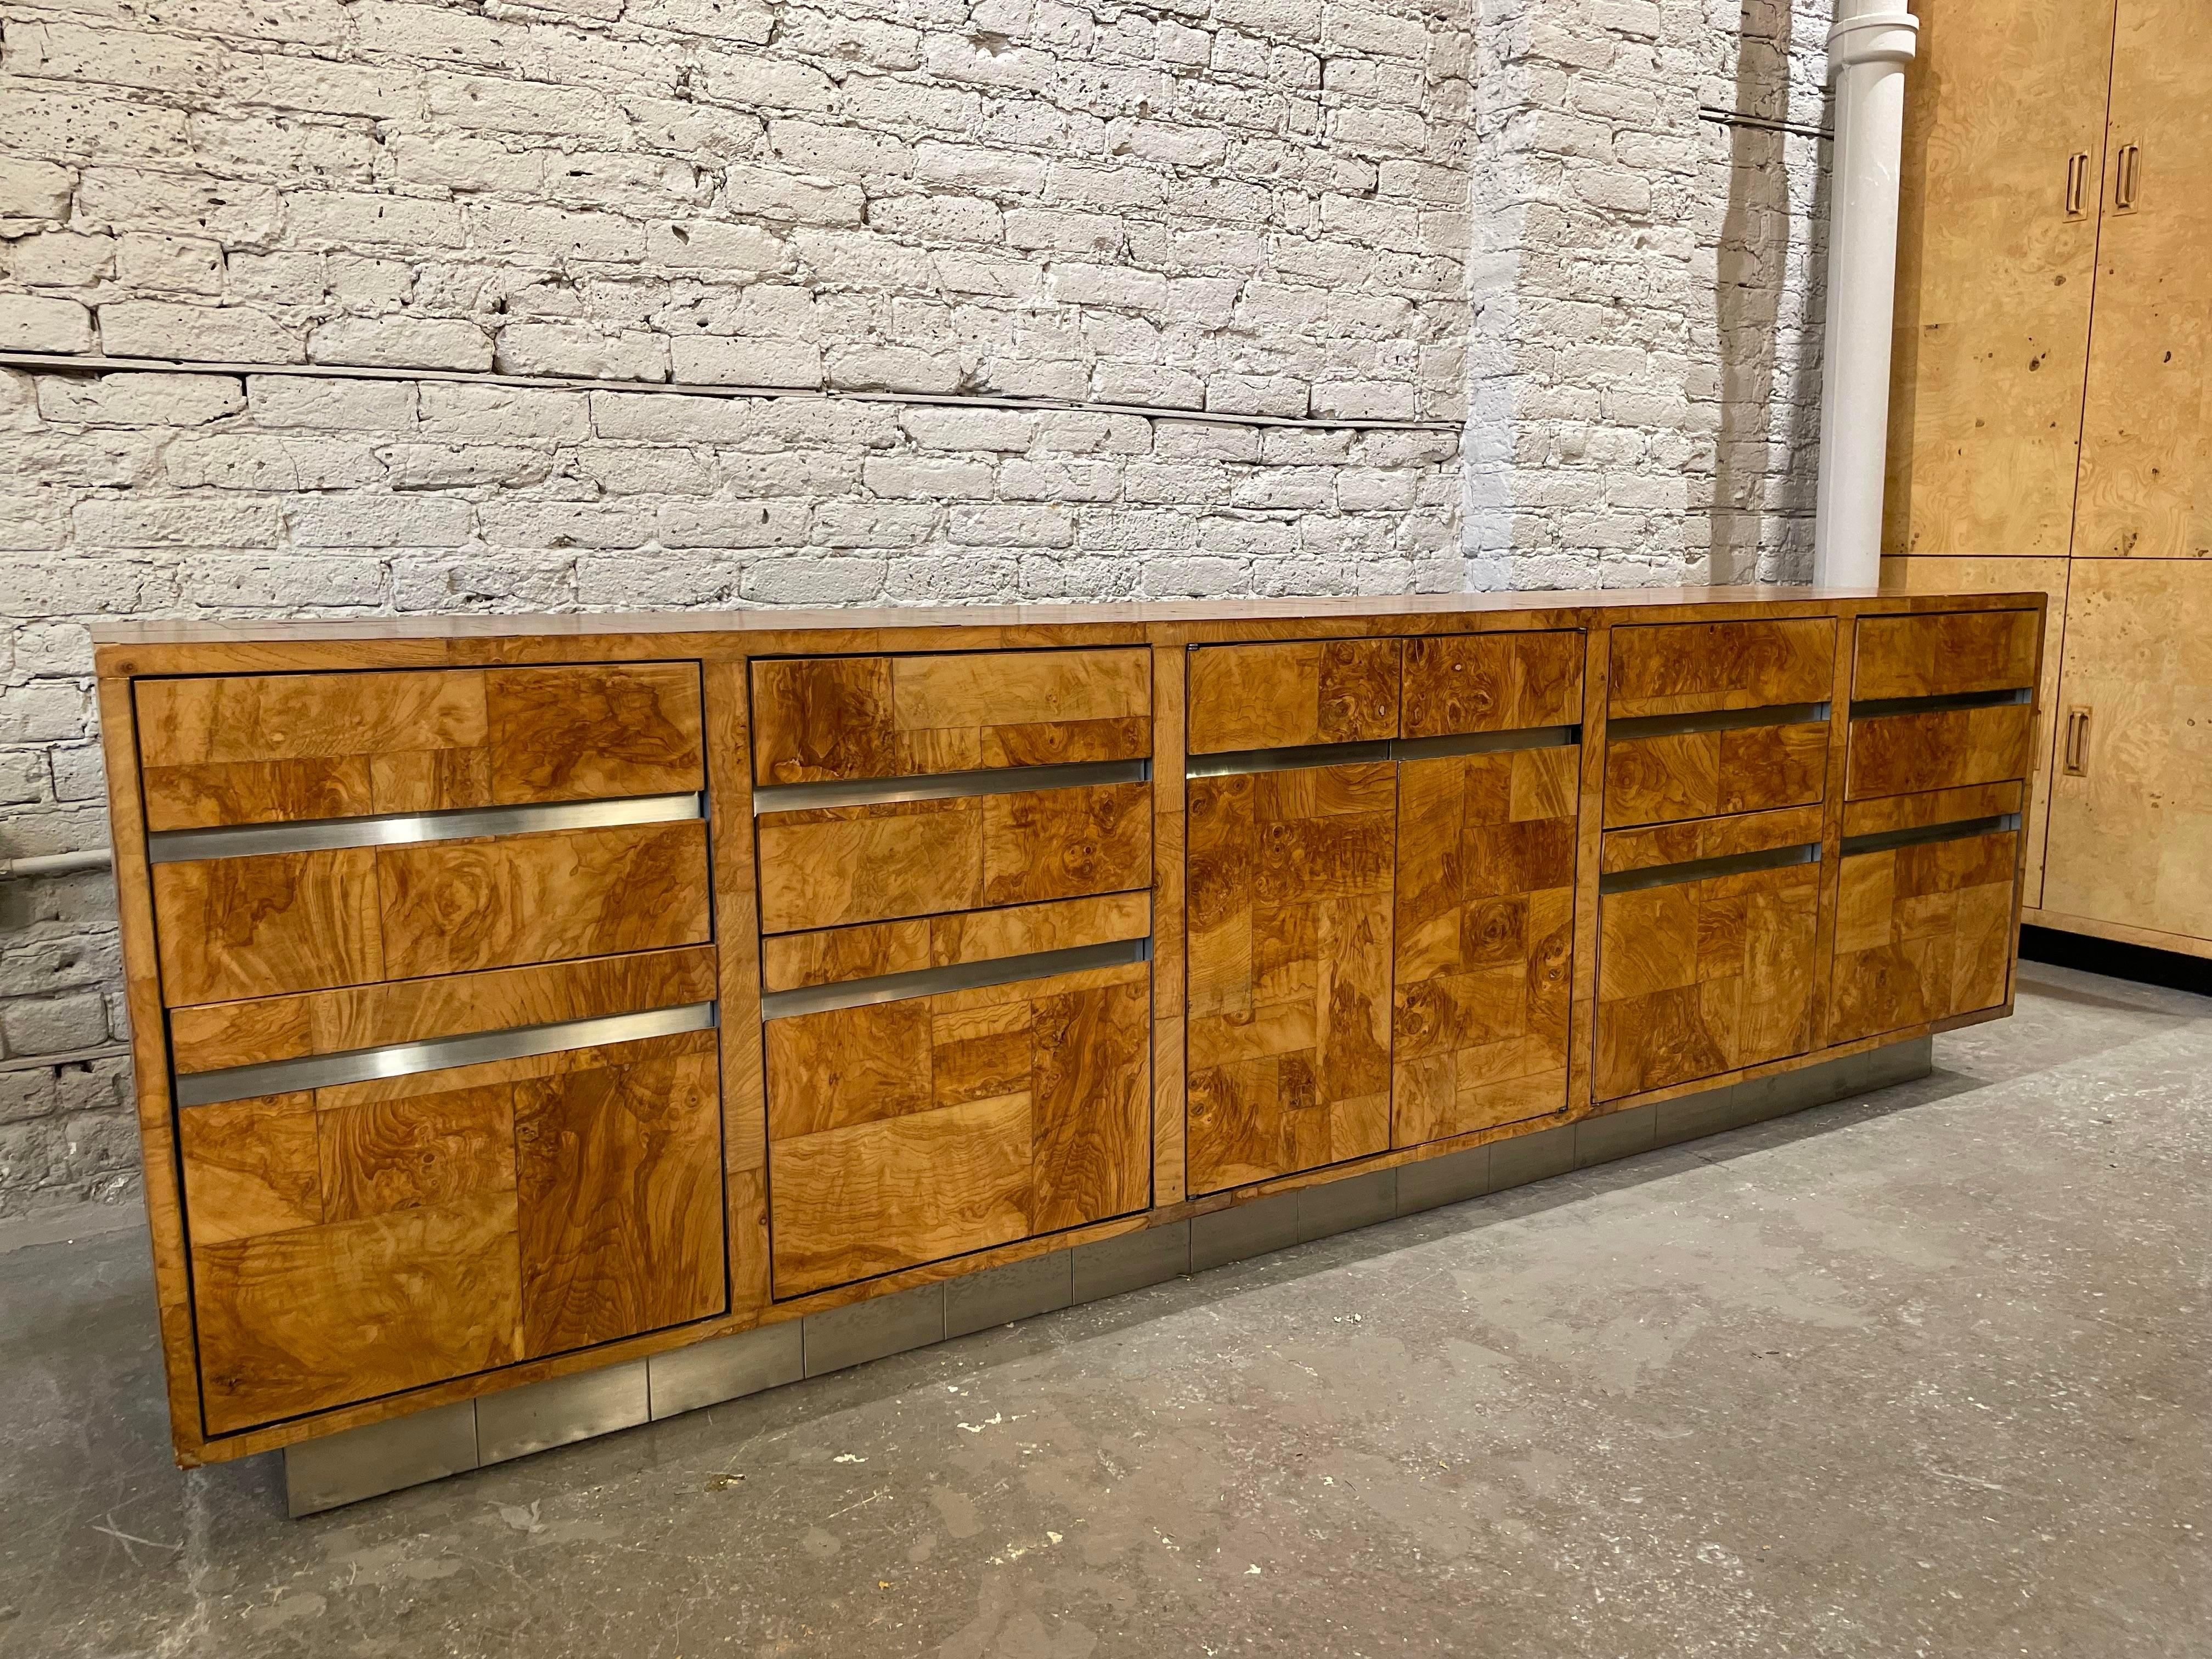 Okay this is just too good. Amazing scale at 8’ long, this can be used as a credenza, dresser, office storage, or just something pretty to look at it. It’s aged so well.

Note - there are no lables or tags but it is believed to be by Milo